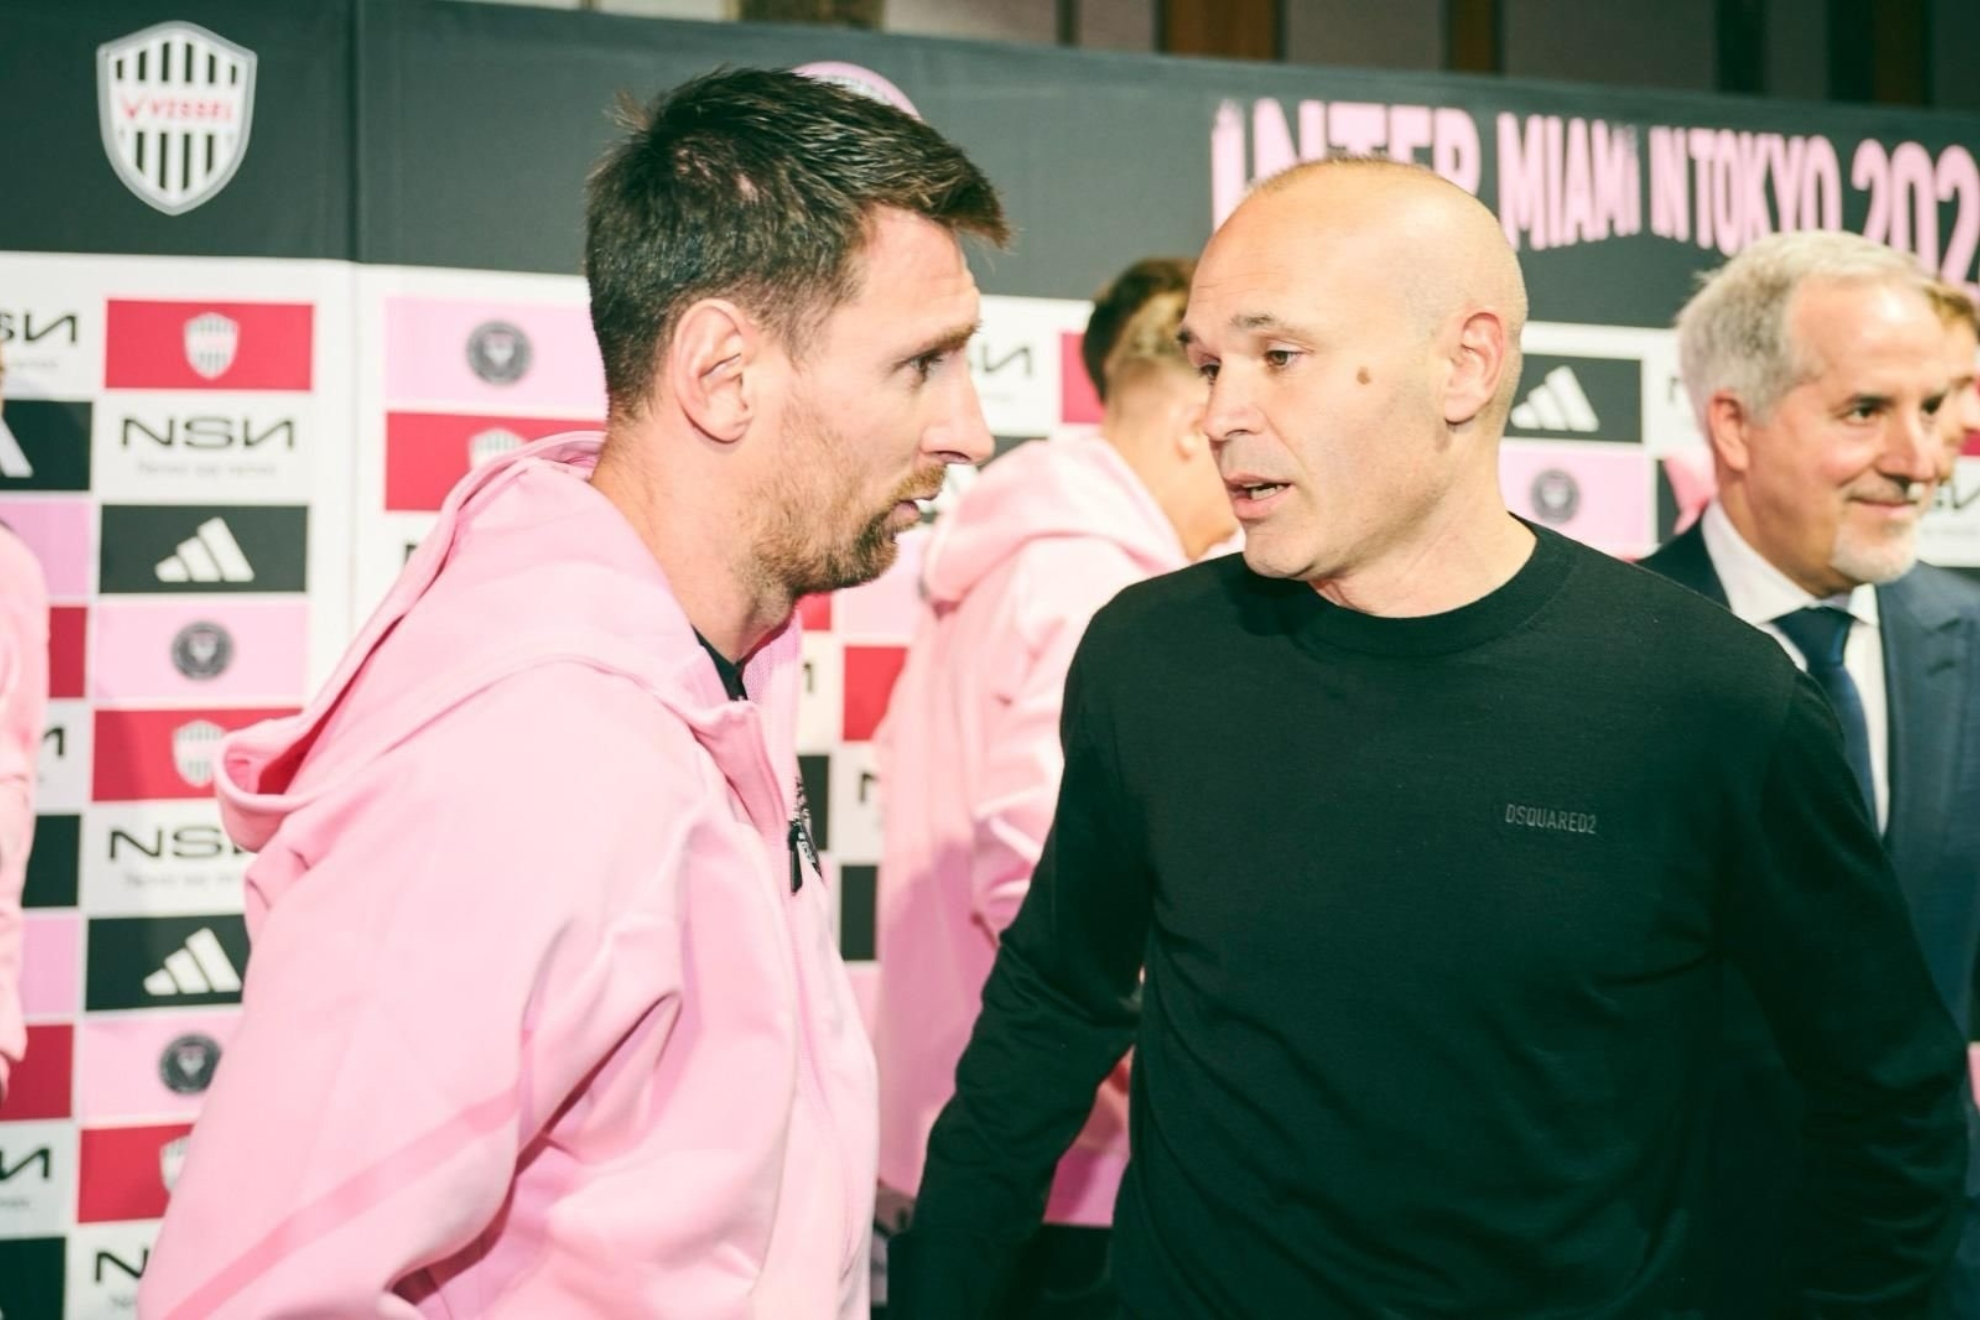 Andres Iniesta and Lionel Messi meet again in a friendly match